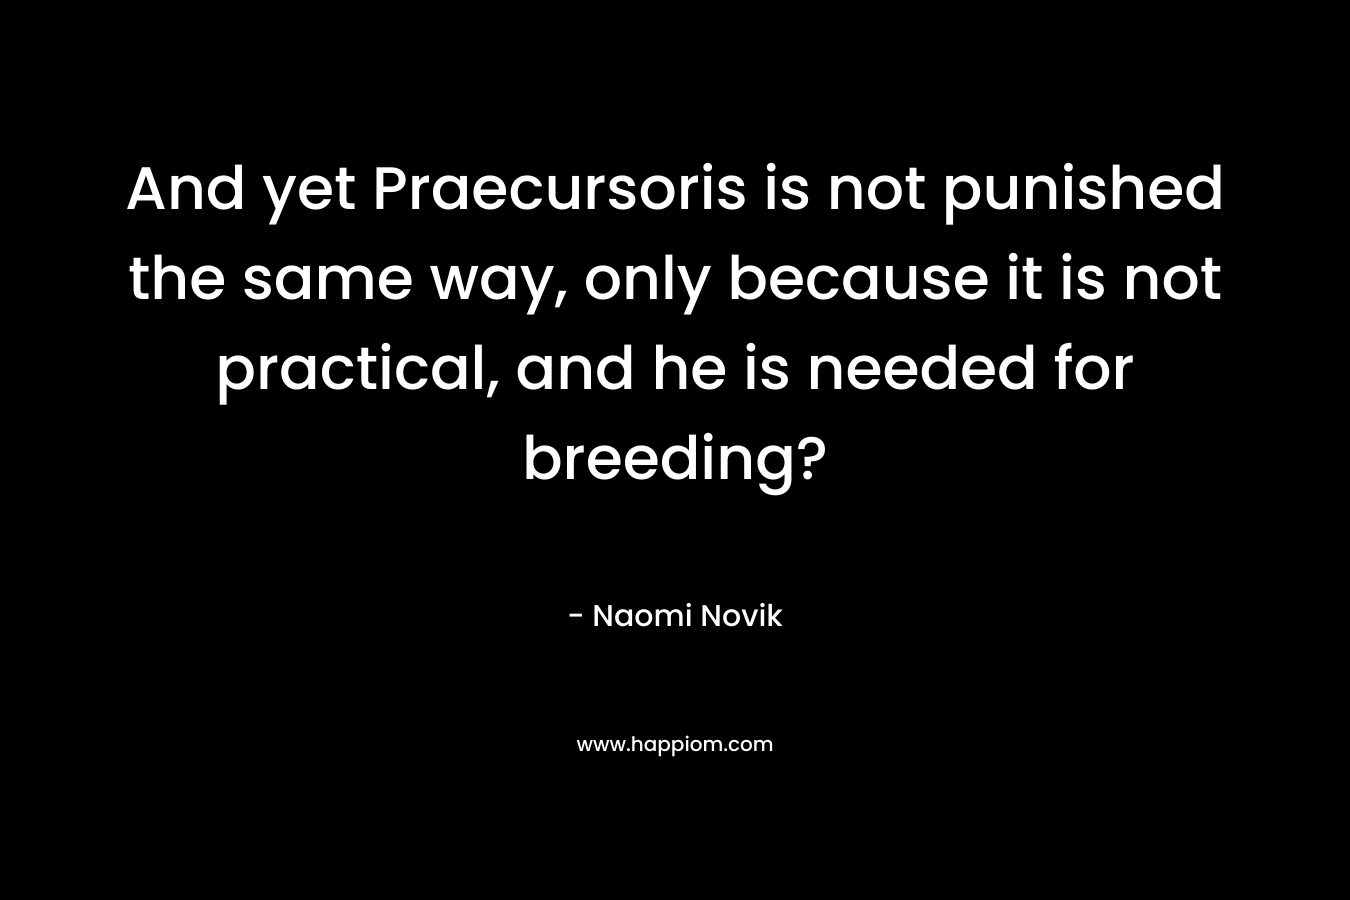 And yet Praecursoris is not punished the same way, only because it is not practical, and he is needed for breeding?